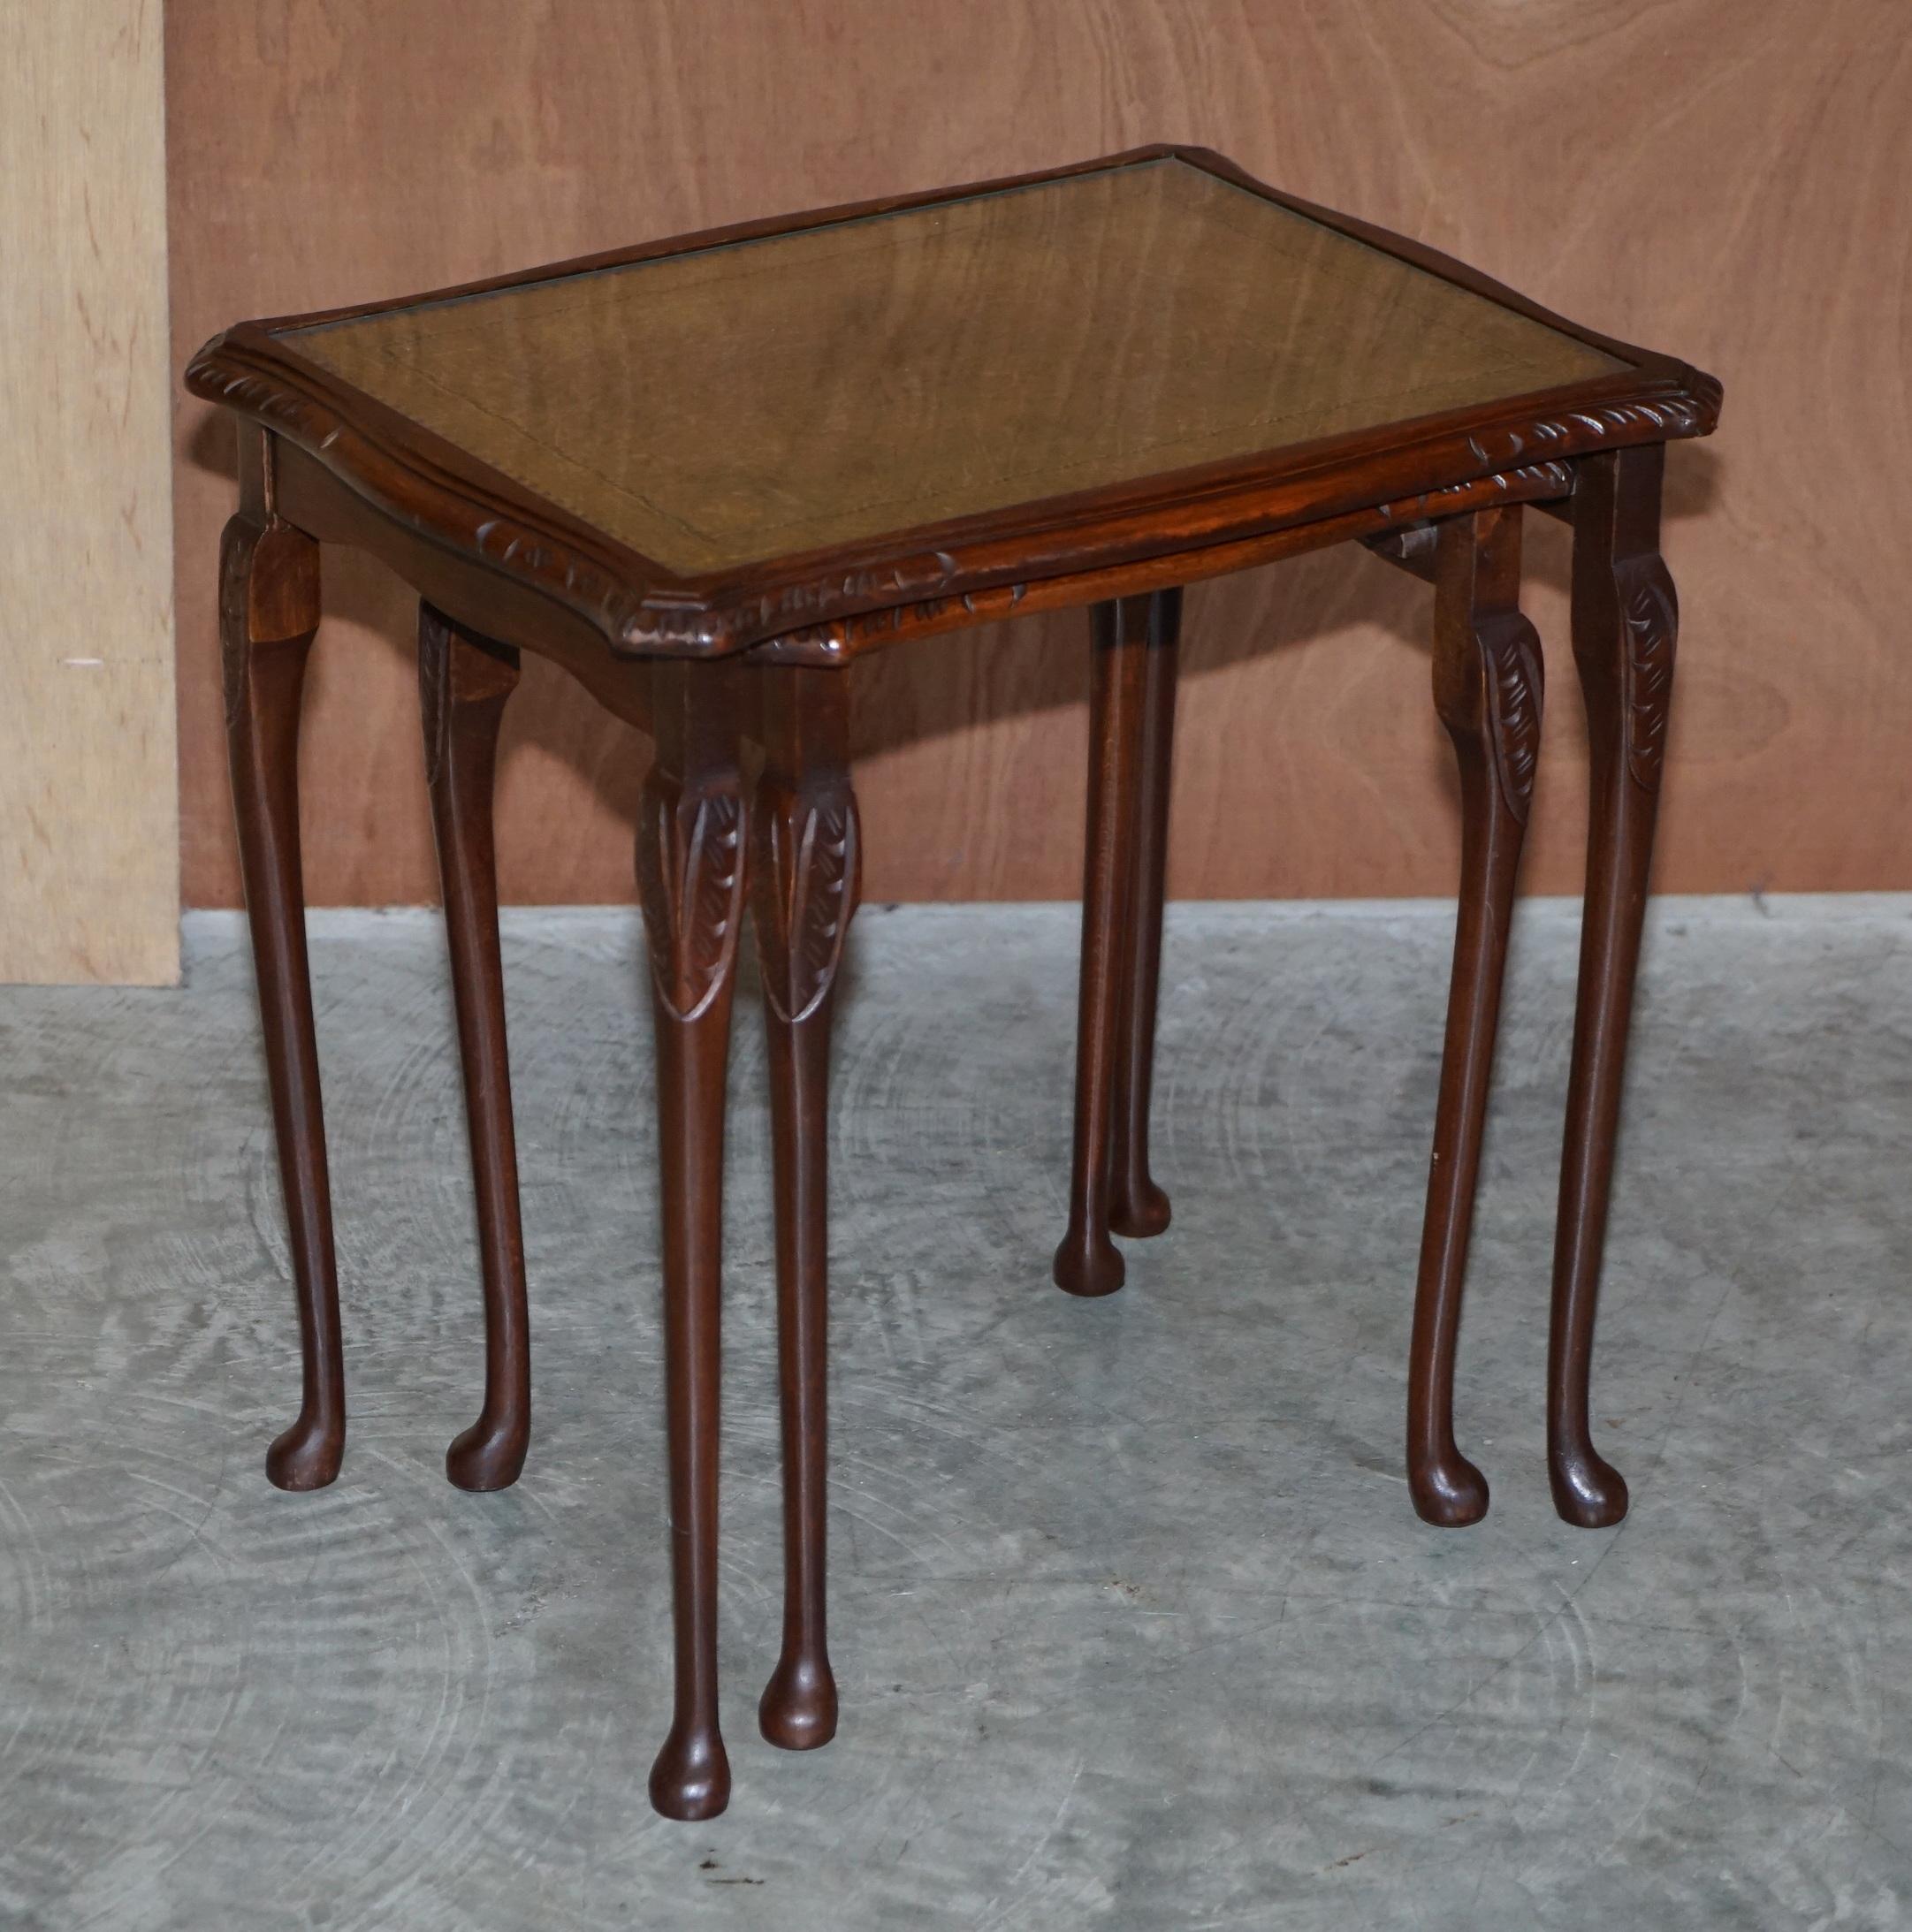 We are delighted to offer for sale this nice green leather nested table 

A good looking little nest, the legs have a mahogany finish with ornate carvings, the tops are green leather with gold leaf embossing and glass tops

Condition wise we